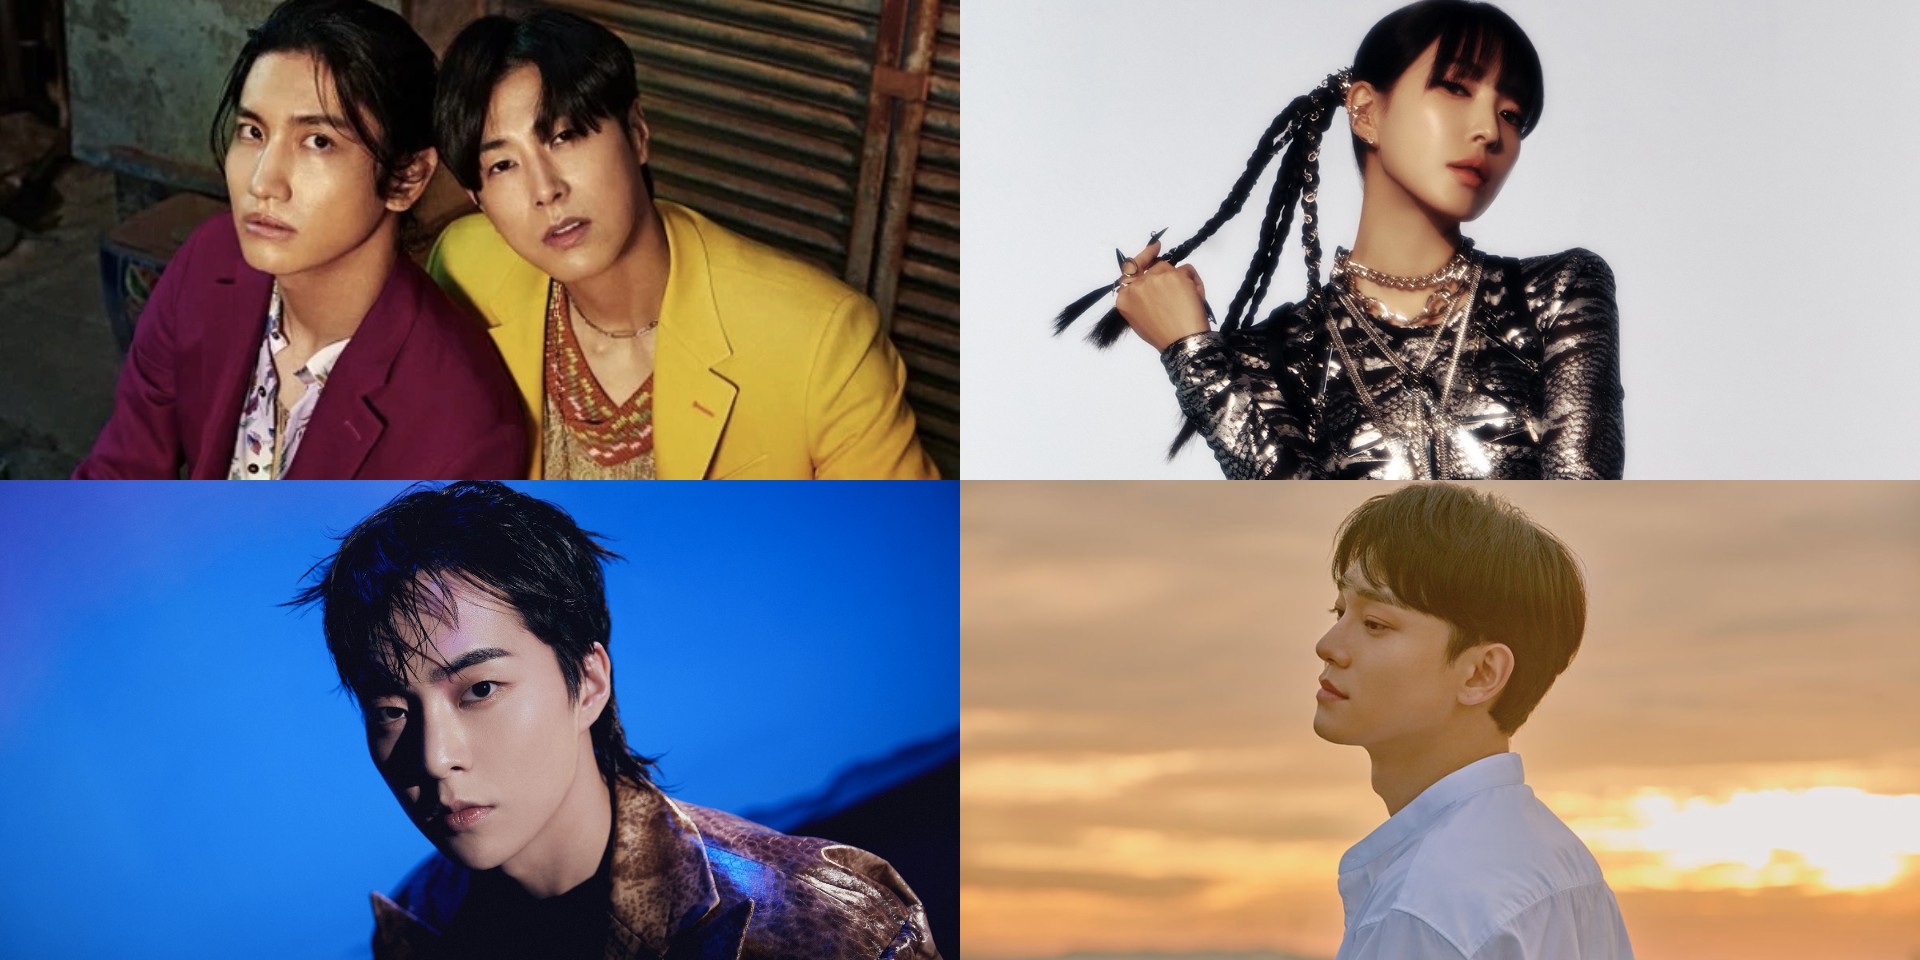 BoA, TVXQ!, EXO's Chen and Xiumin, and more to perform at Be You 2 in Manila and Cebu